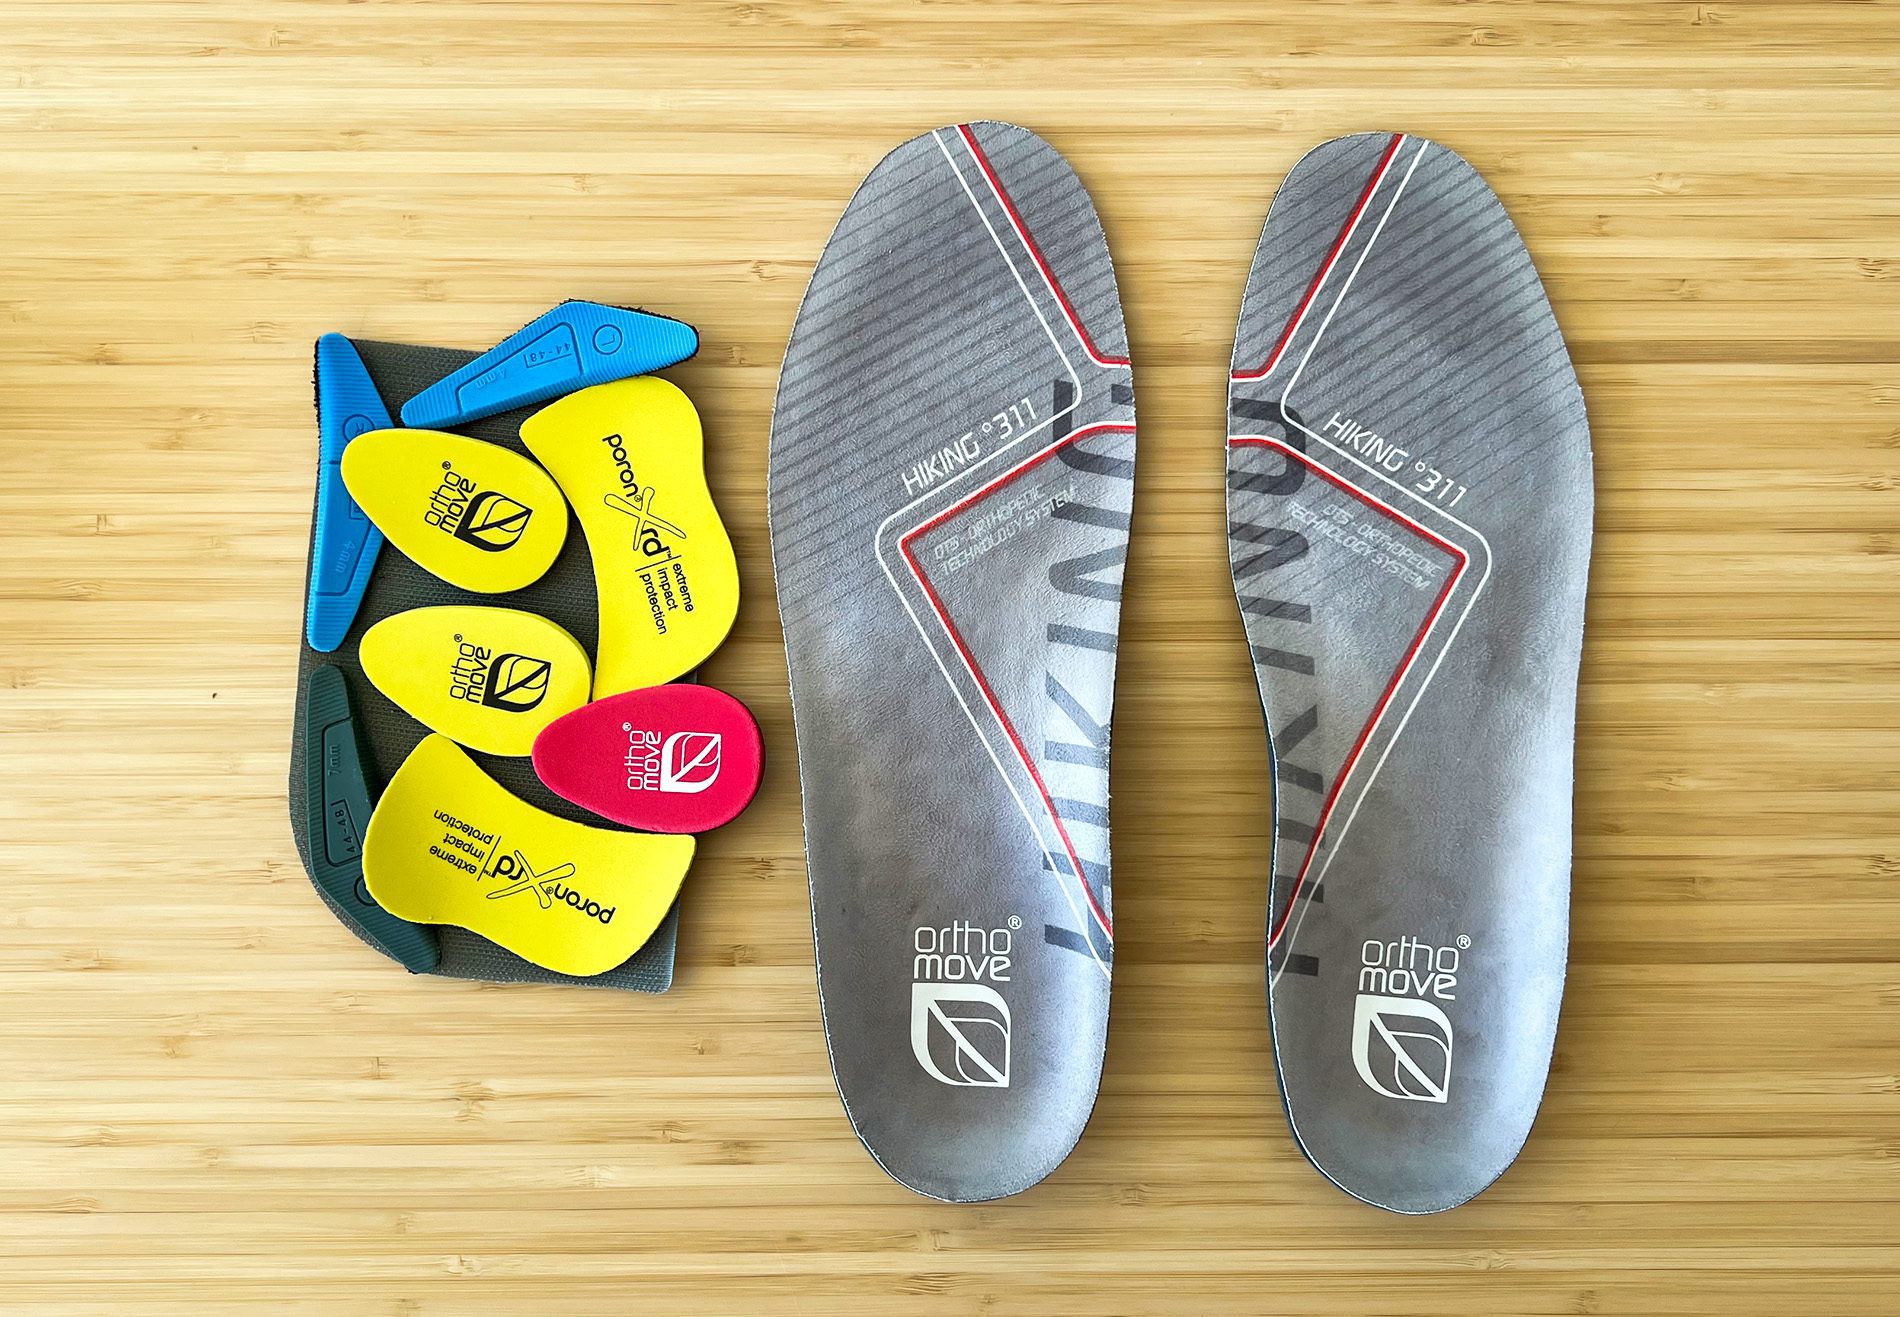 These are the Orthomove Hiking insoles, whereby on the left side are part of the Velcro elements with which you can adjust the height and flexibility of the sole (photos: Sir Apfelot).